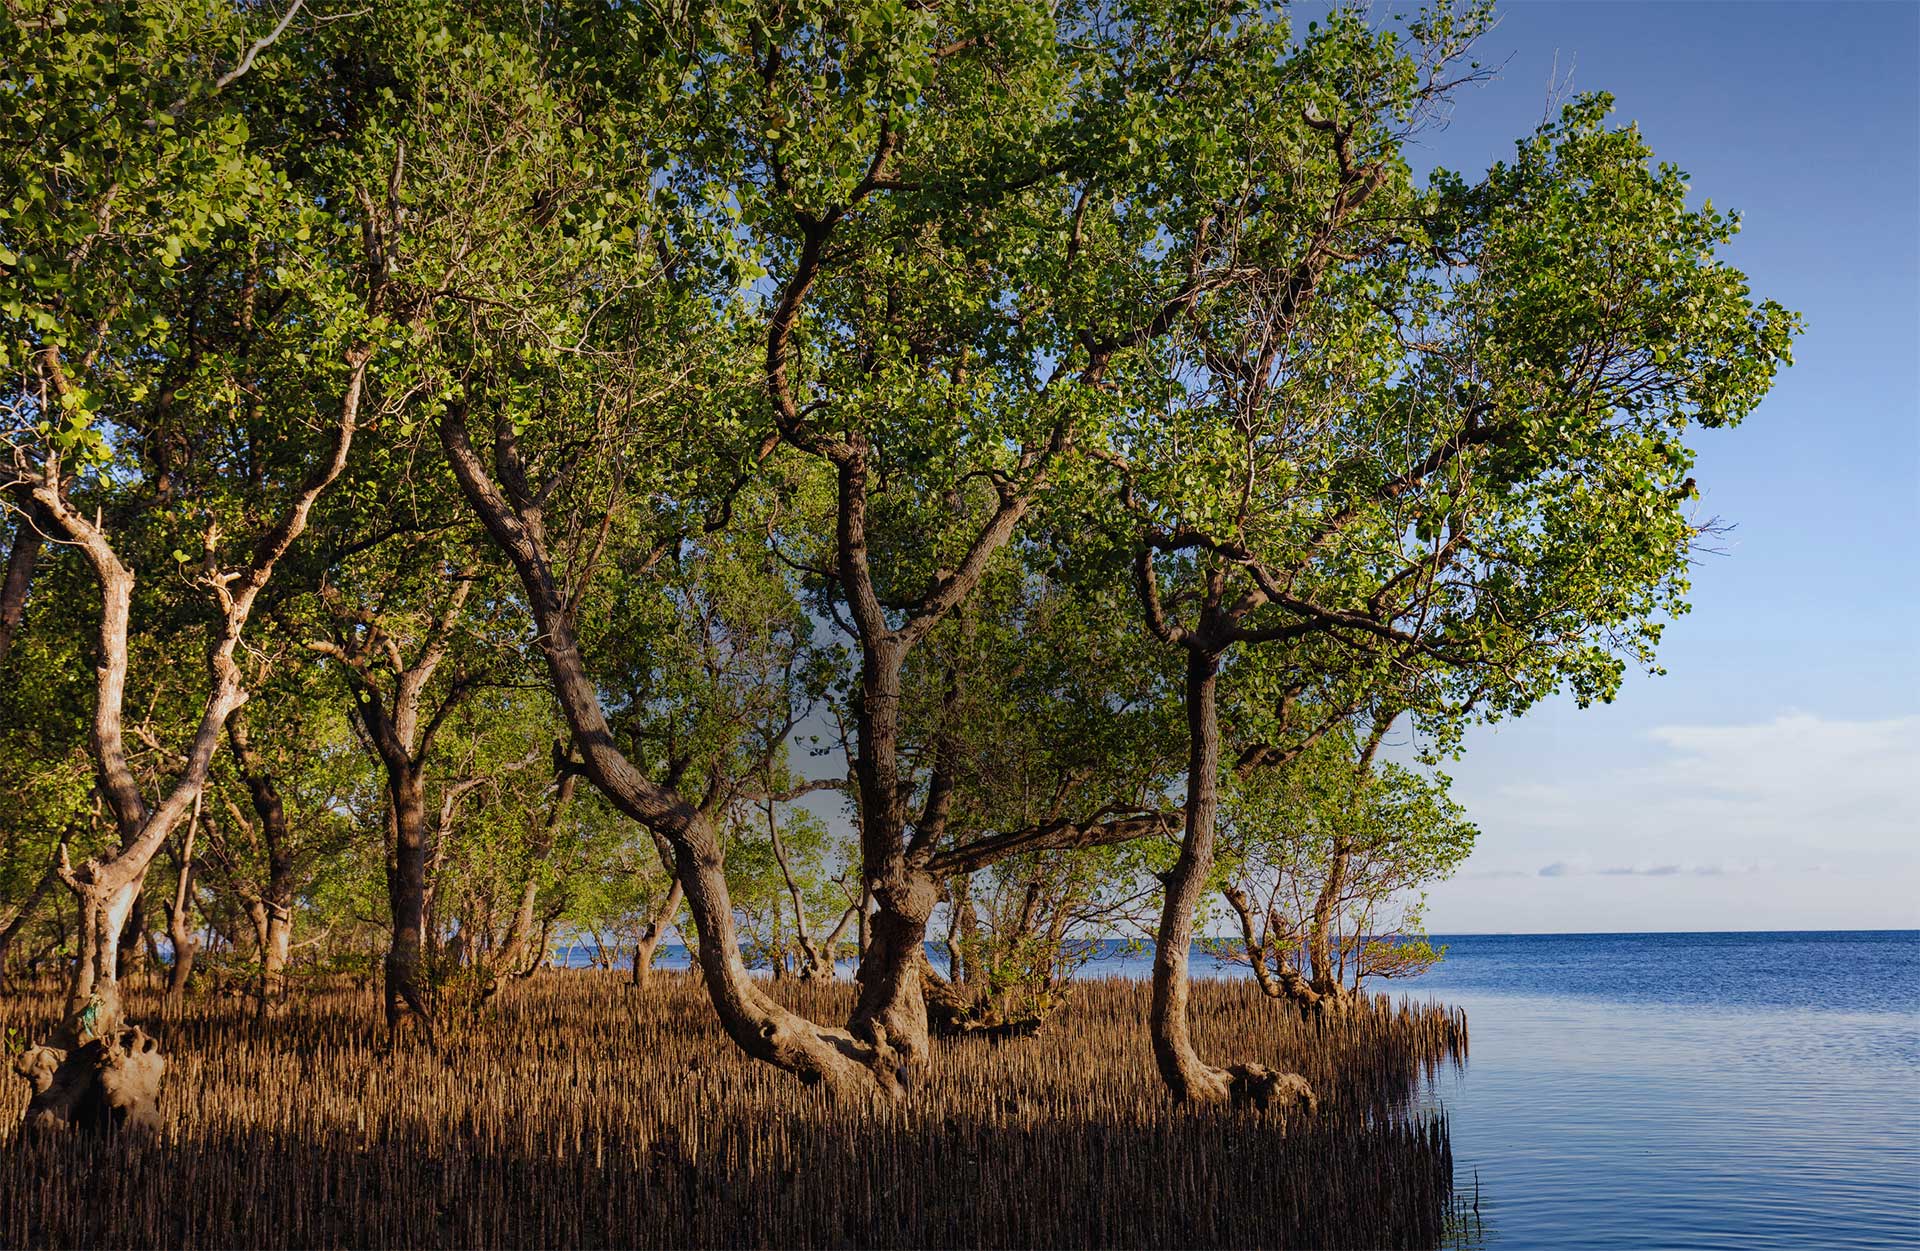 Mangrove trees on the outer edge of a mangrove forest